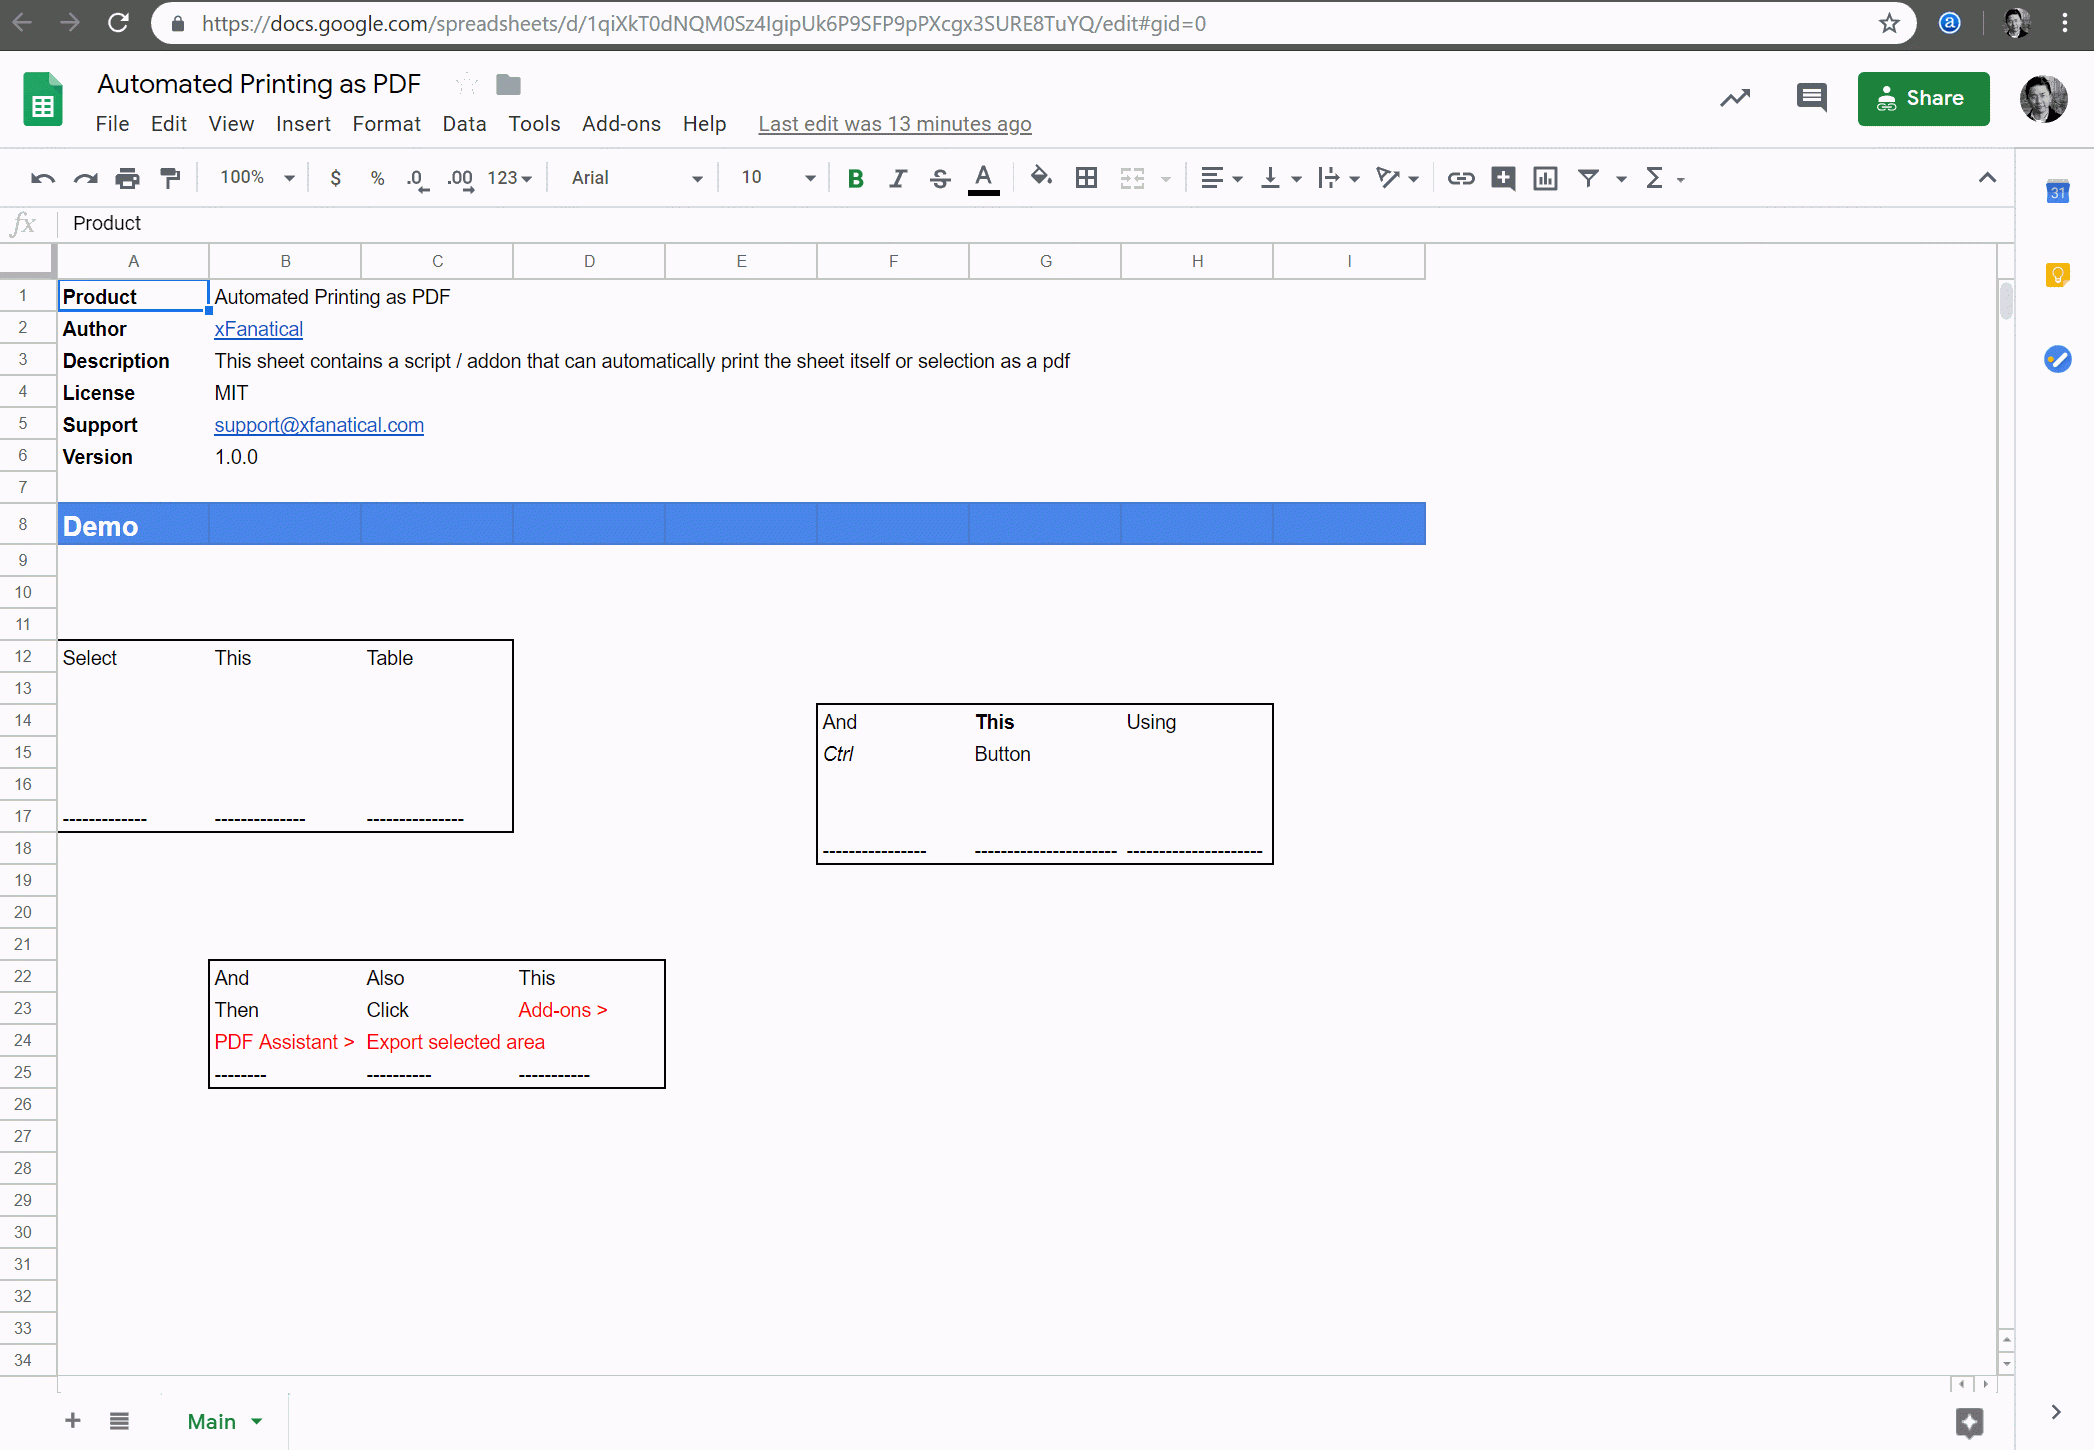 How To Print Google Sheet To Pdf Using Apps Script - Xfanatical